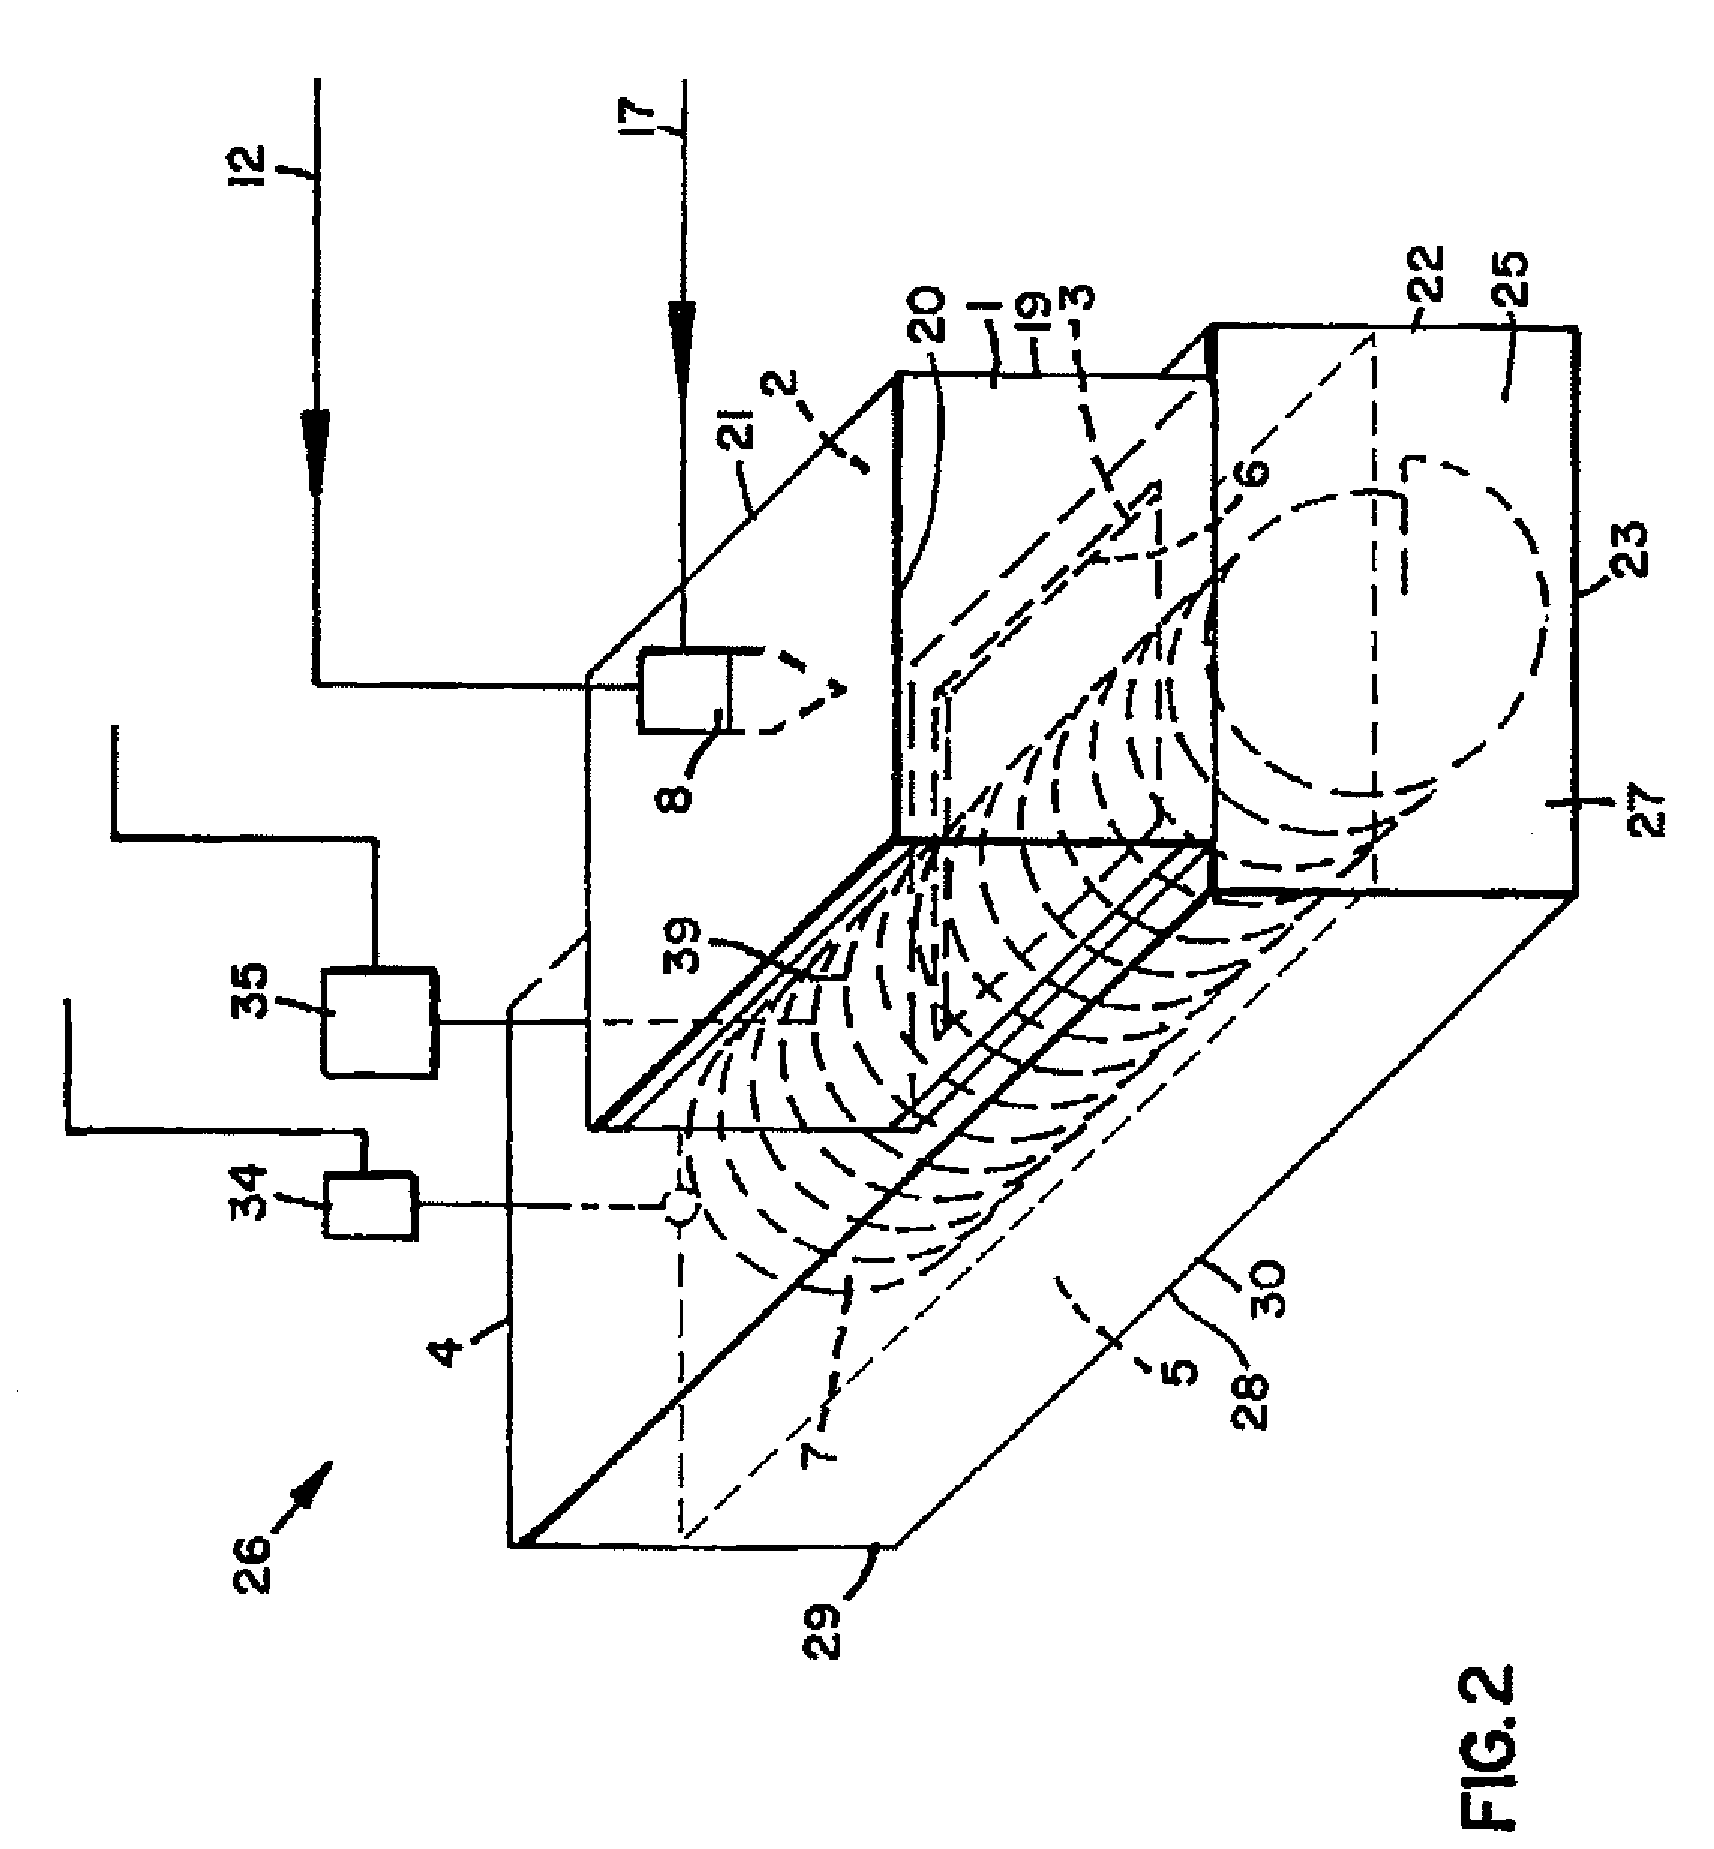 System and method for applying an additive to a material stream